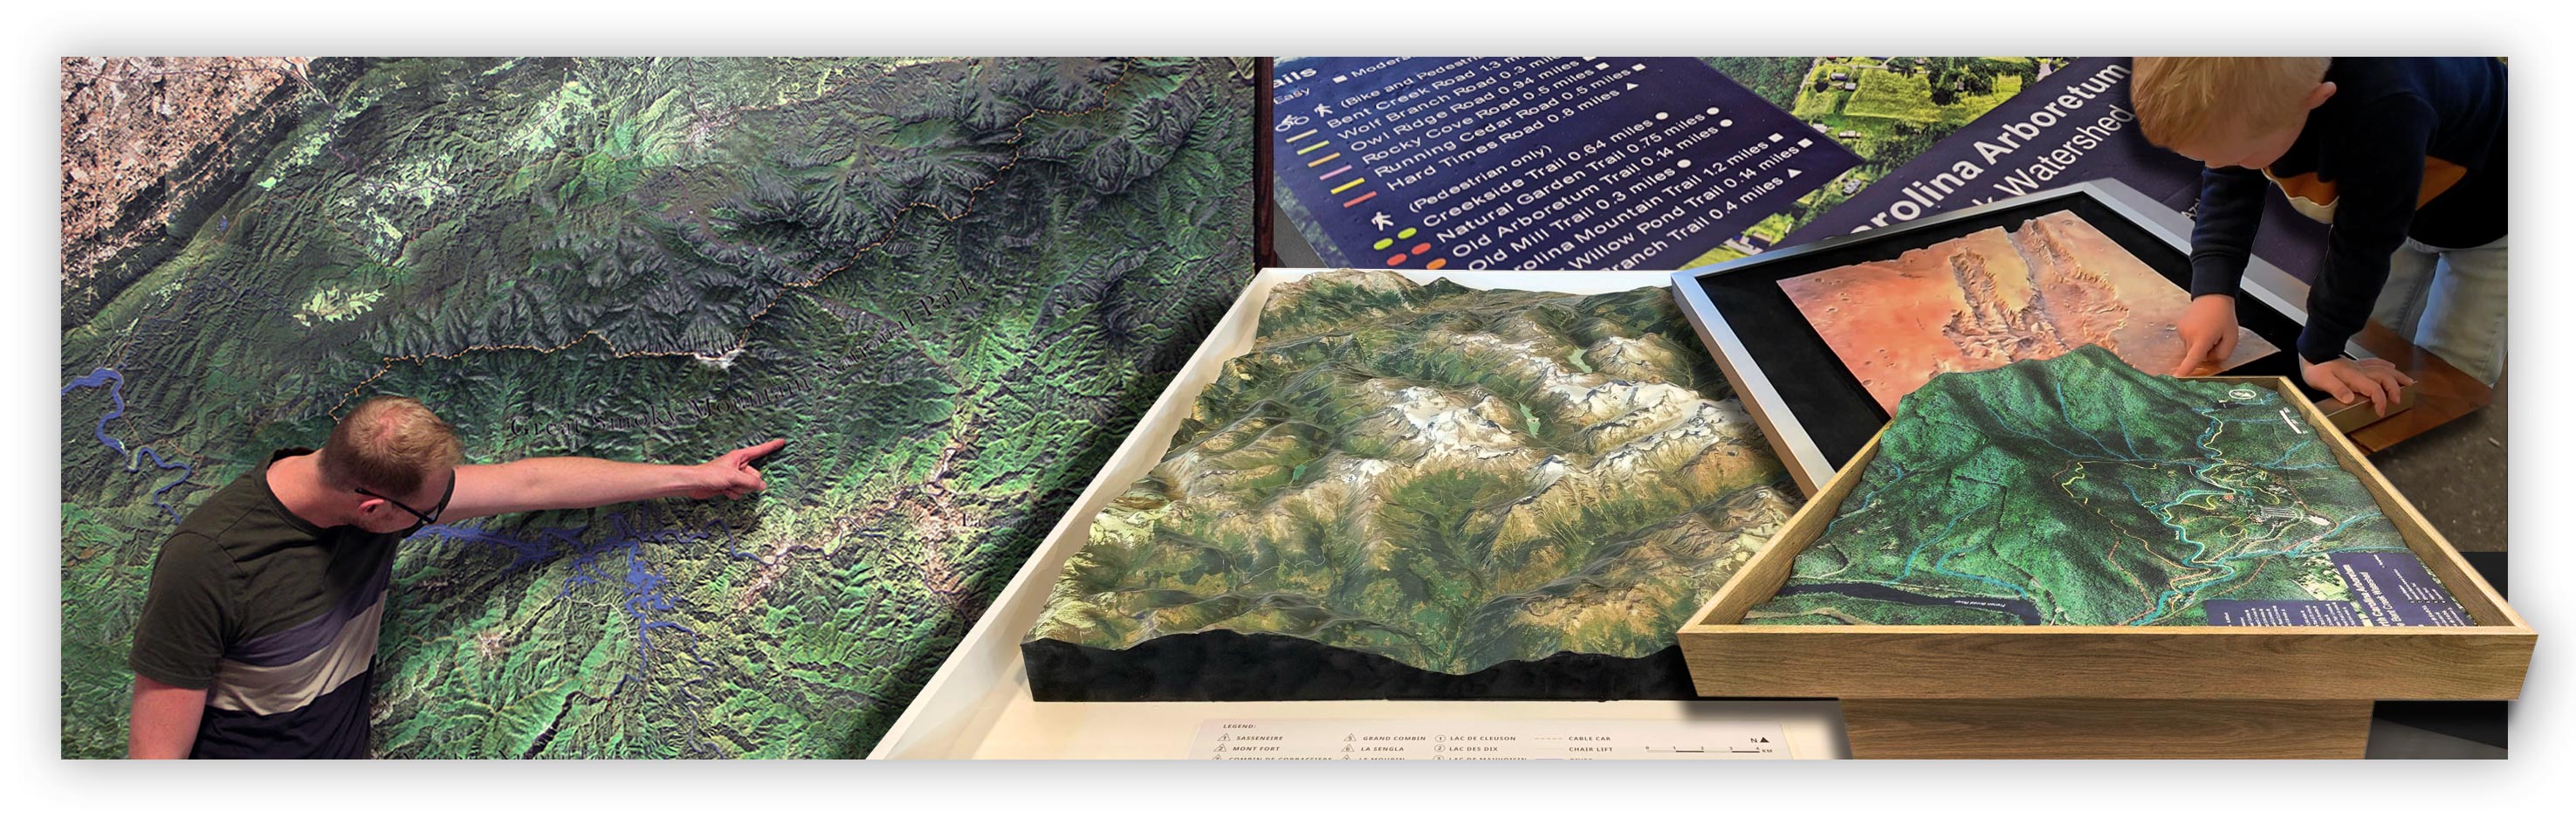 3D RAISED-RELIEF TOPOGRAPHICAL MODELS & DECOR